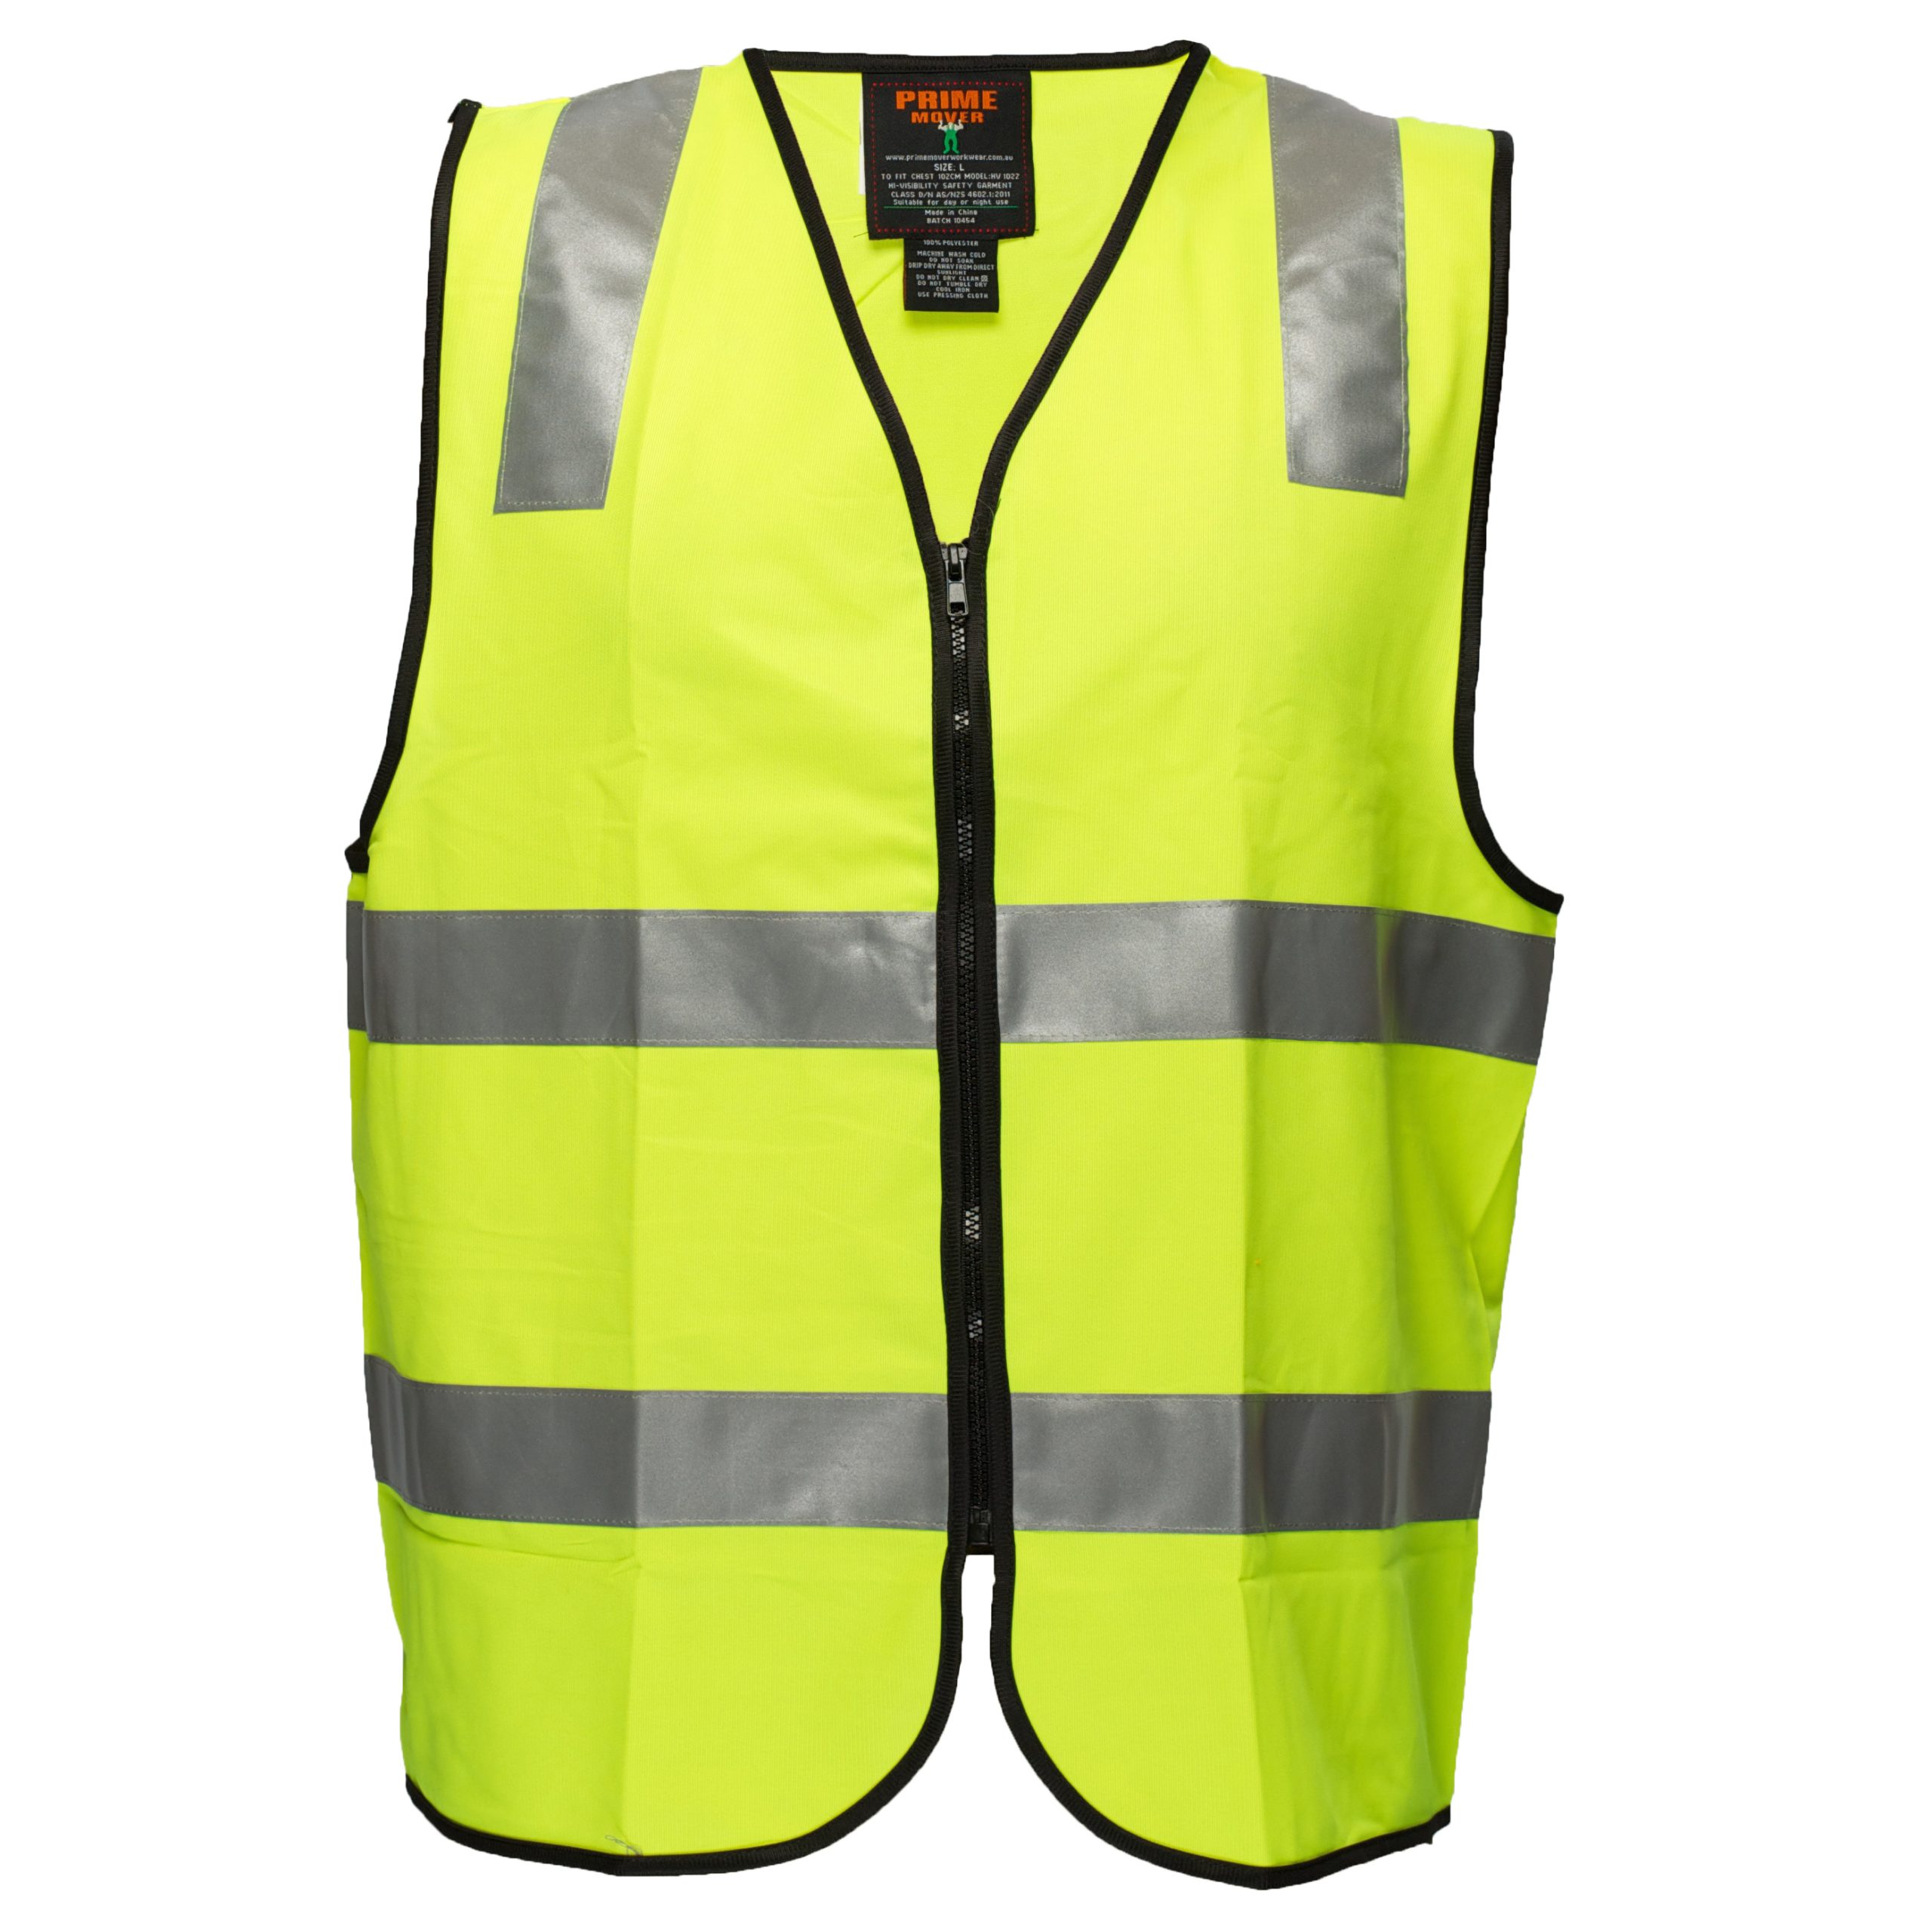 MZ102 Day/Night Safety Vest with Tape with Zip Y1